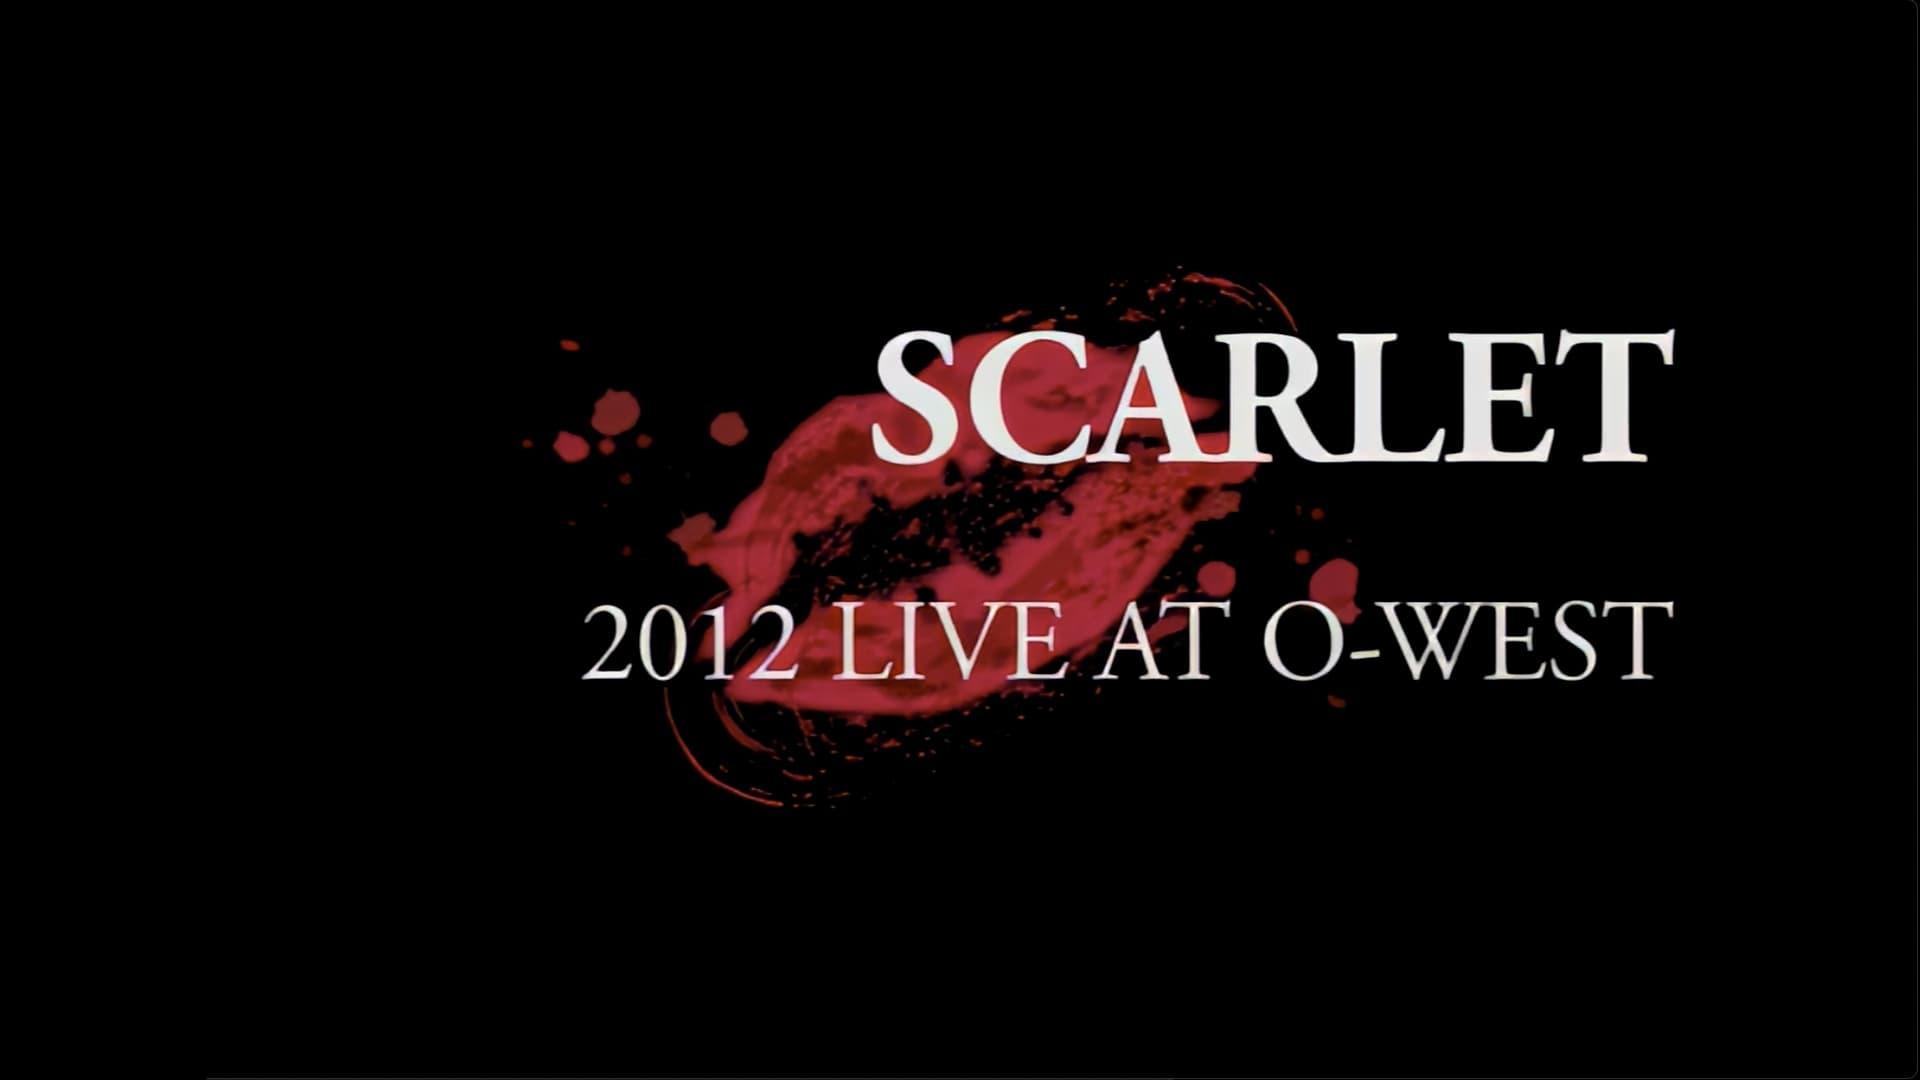 Mary's Blood Scarlet -2012 Live at O-West- backdrop